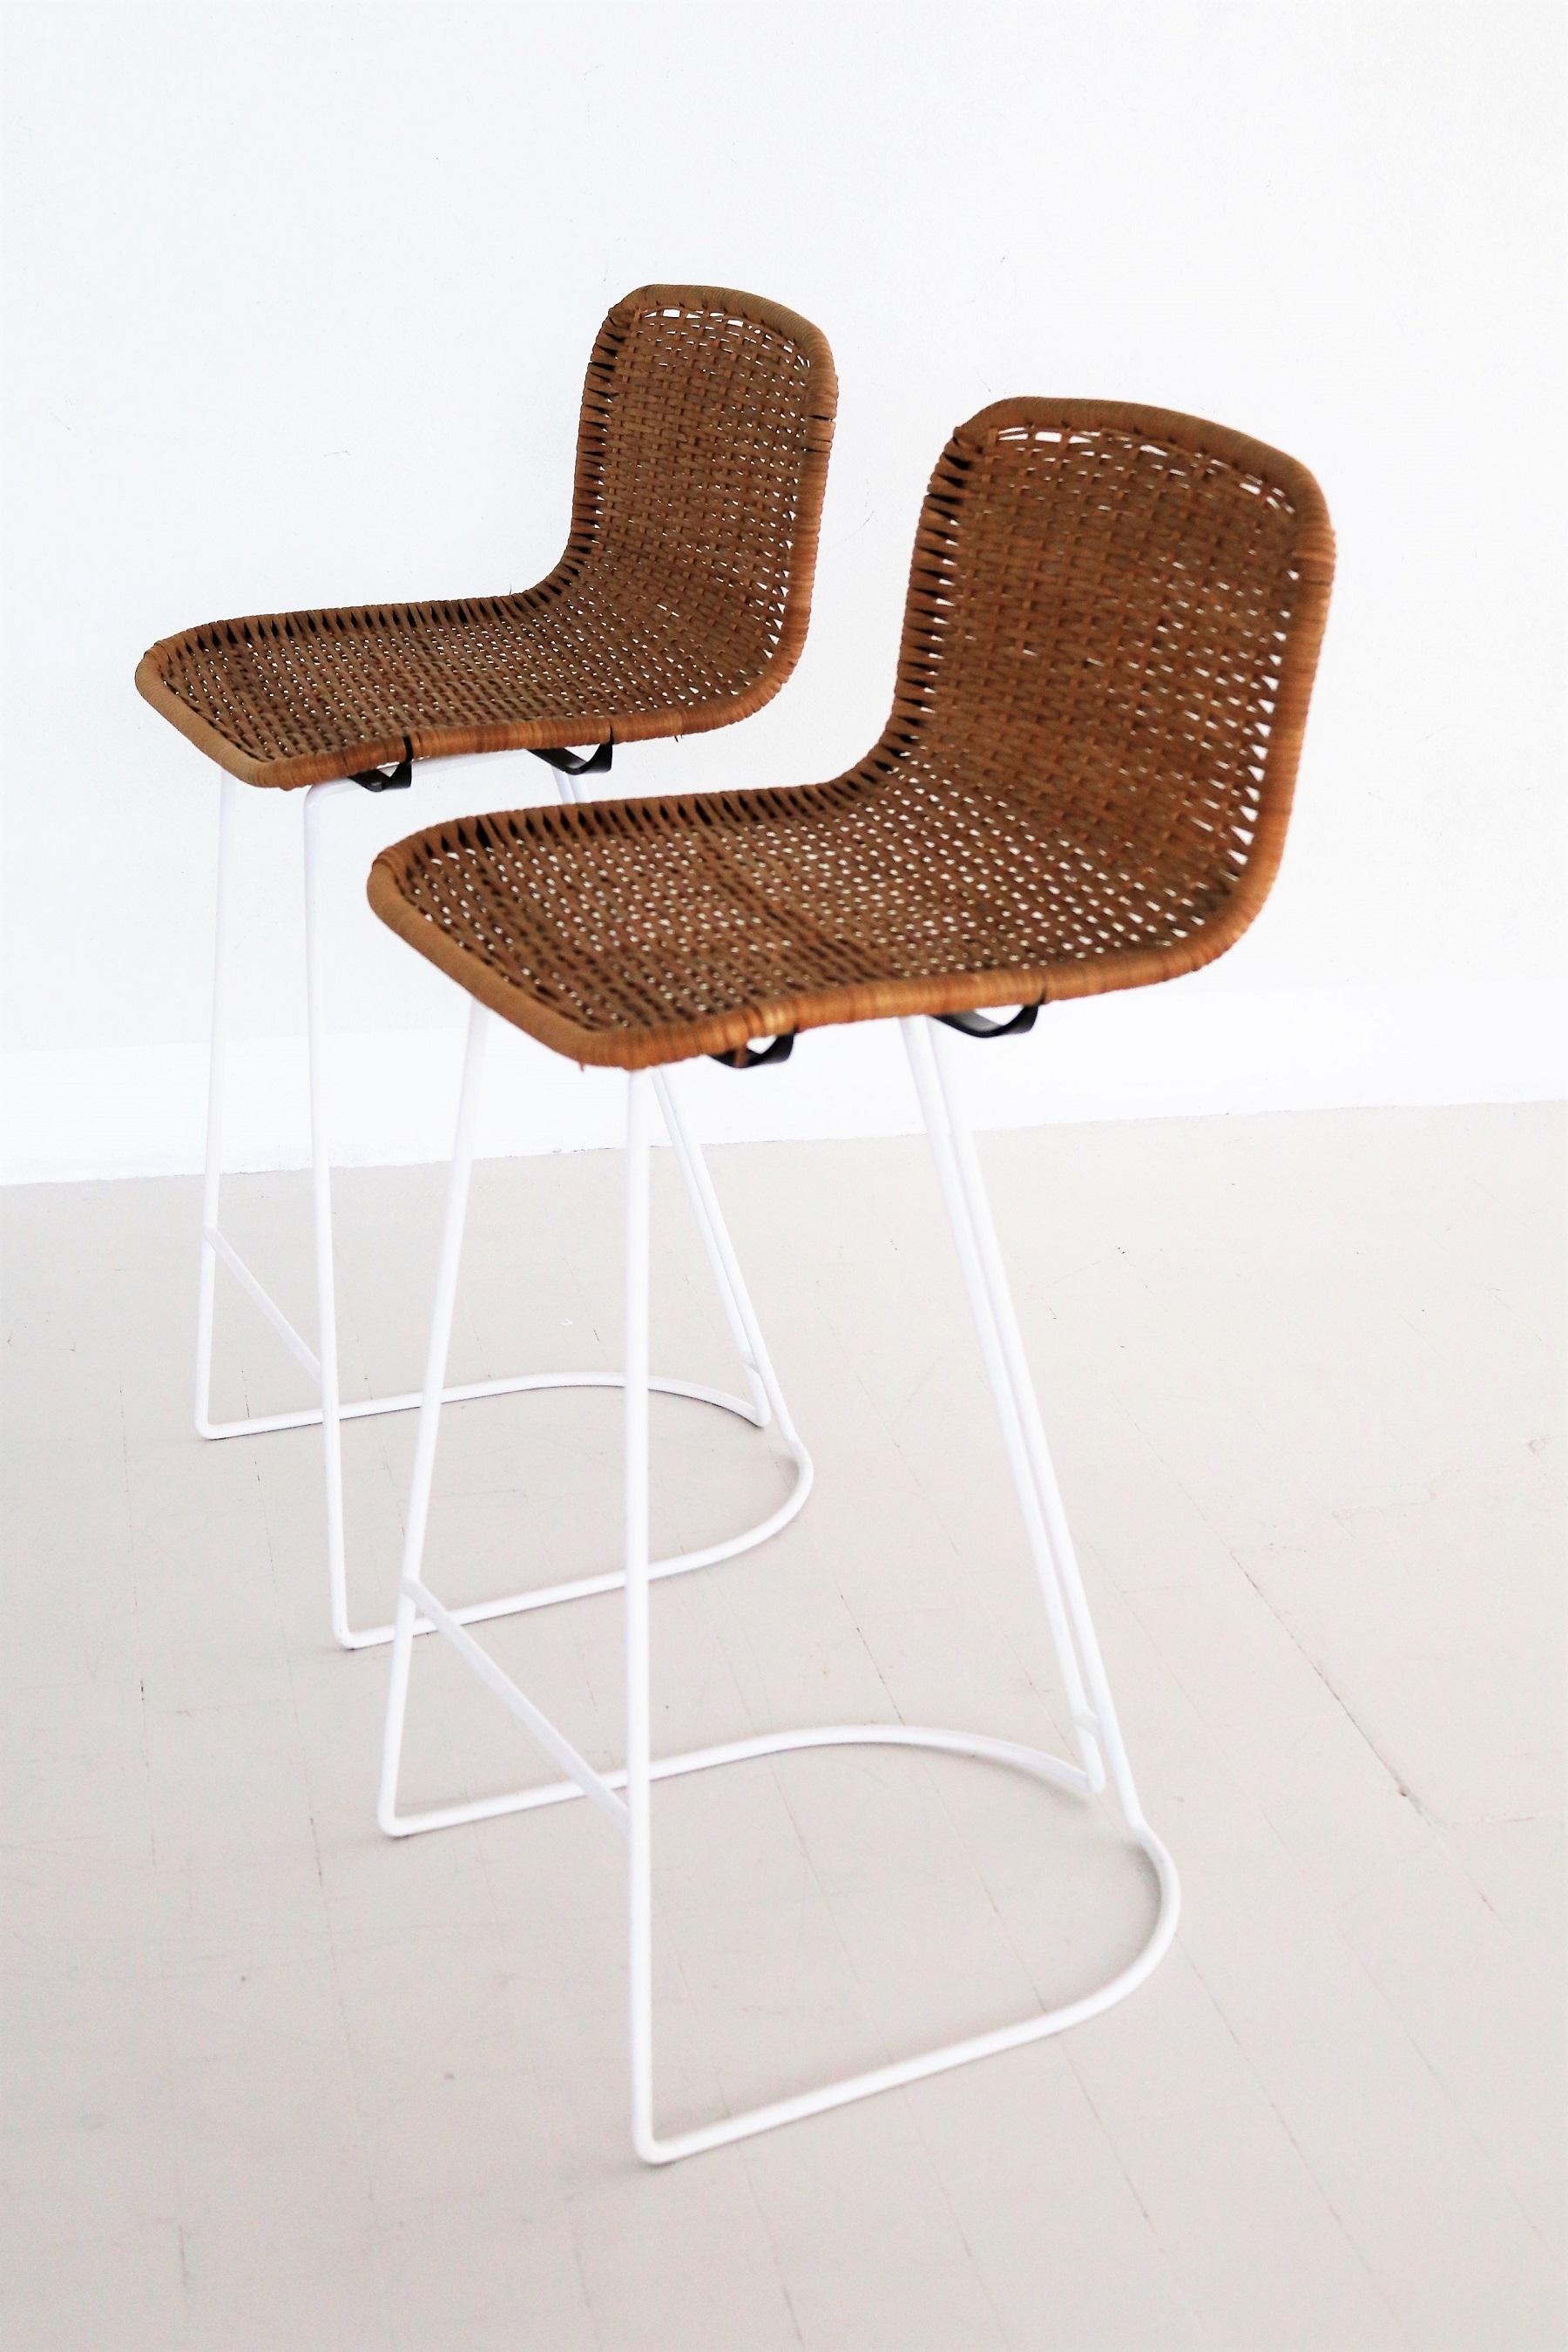 Late 20th Century Italian Midcentury Bar Stools in Wicker and Metal by Cidue, 1980s For Sale